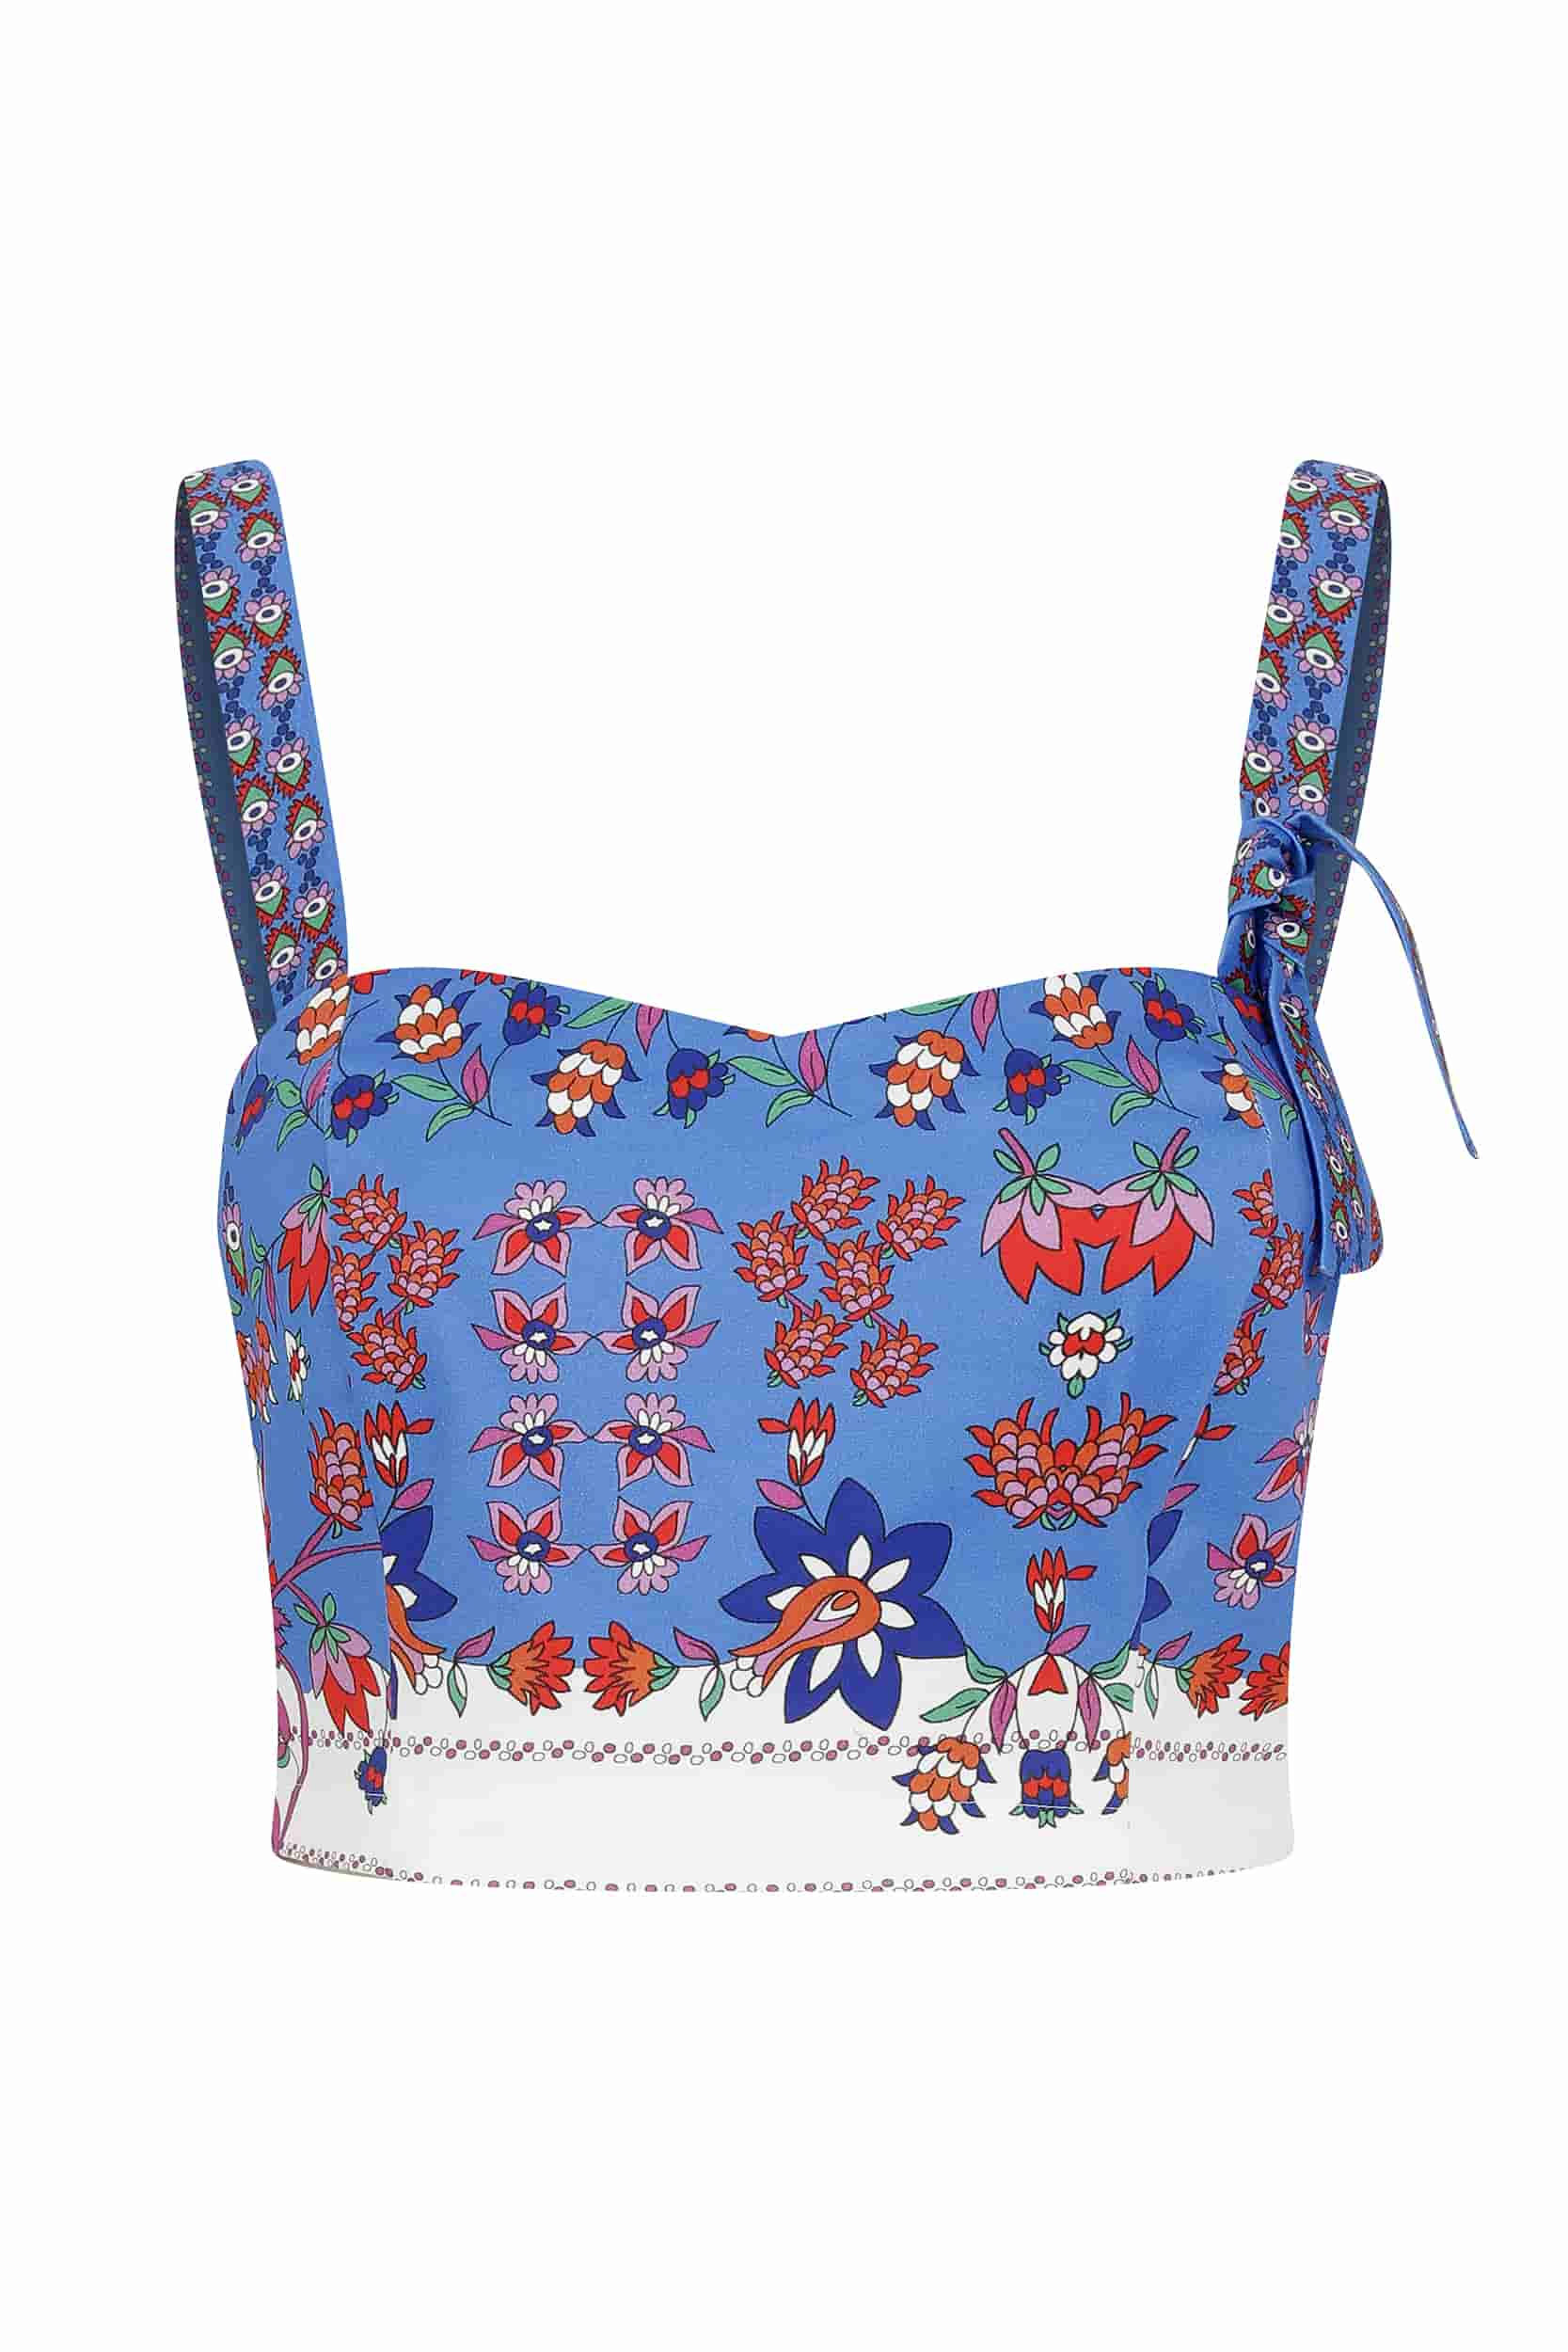 Roman Floral Printed Bustier. 2